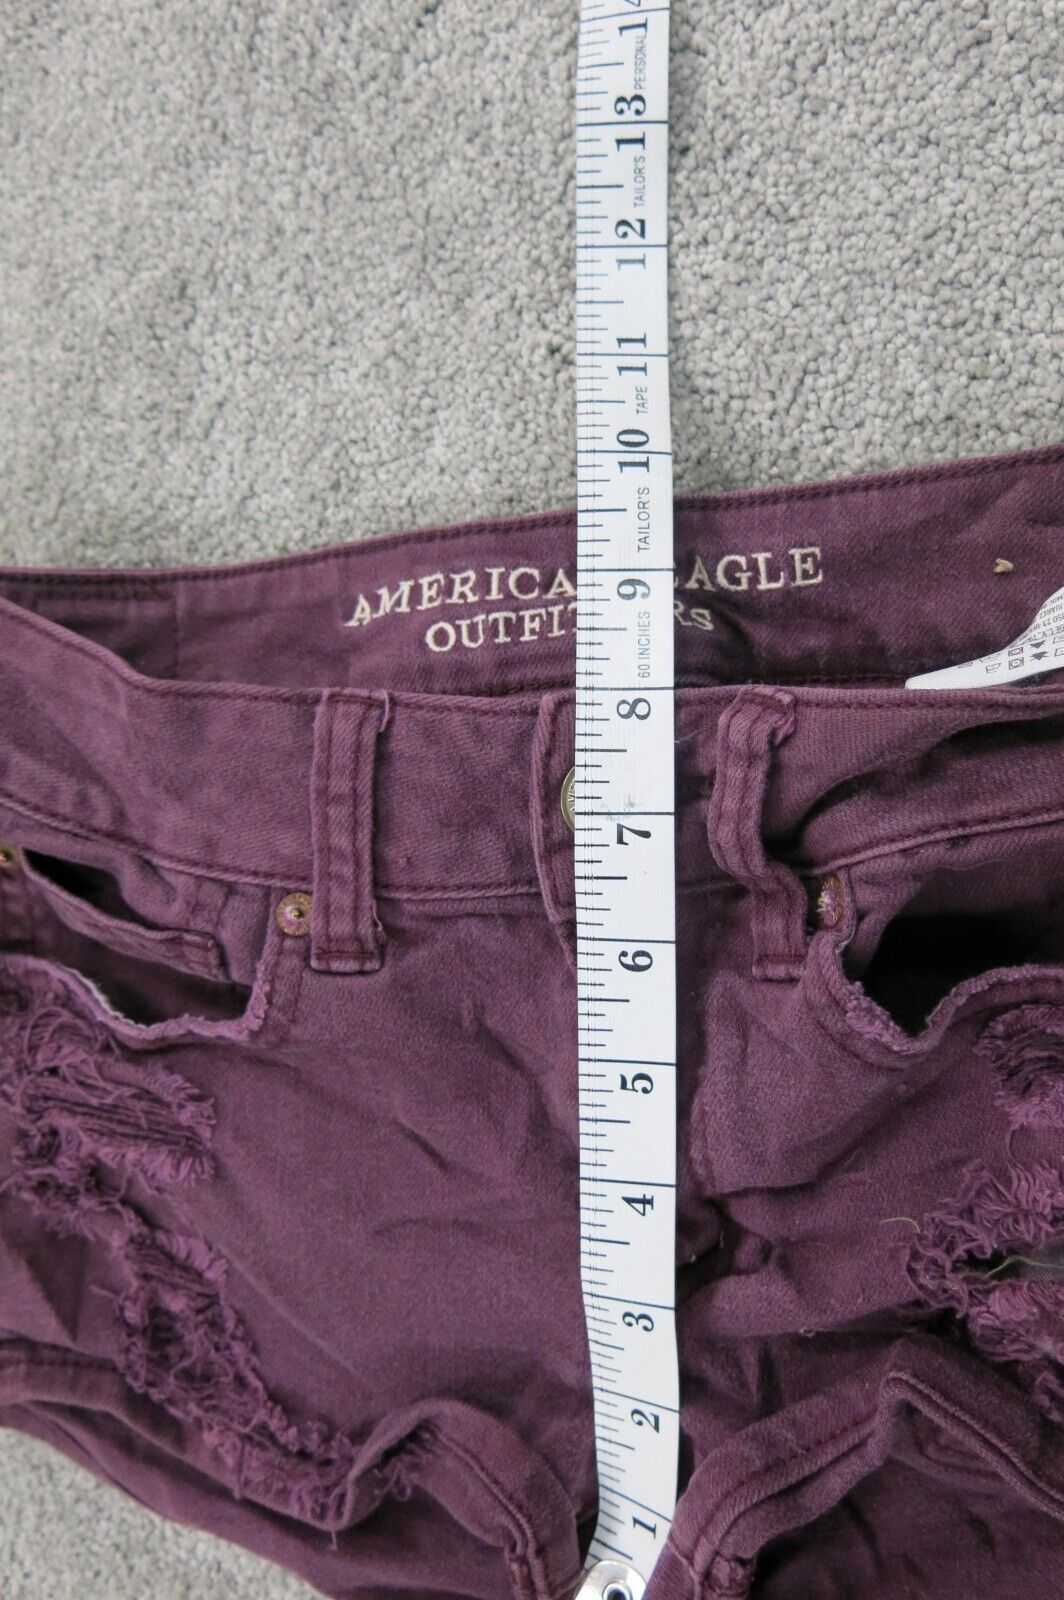 American Eagle Womens Cut Off Shorts Low Rise Distressed Pockets Maroon Size 2